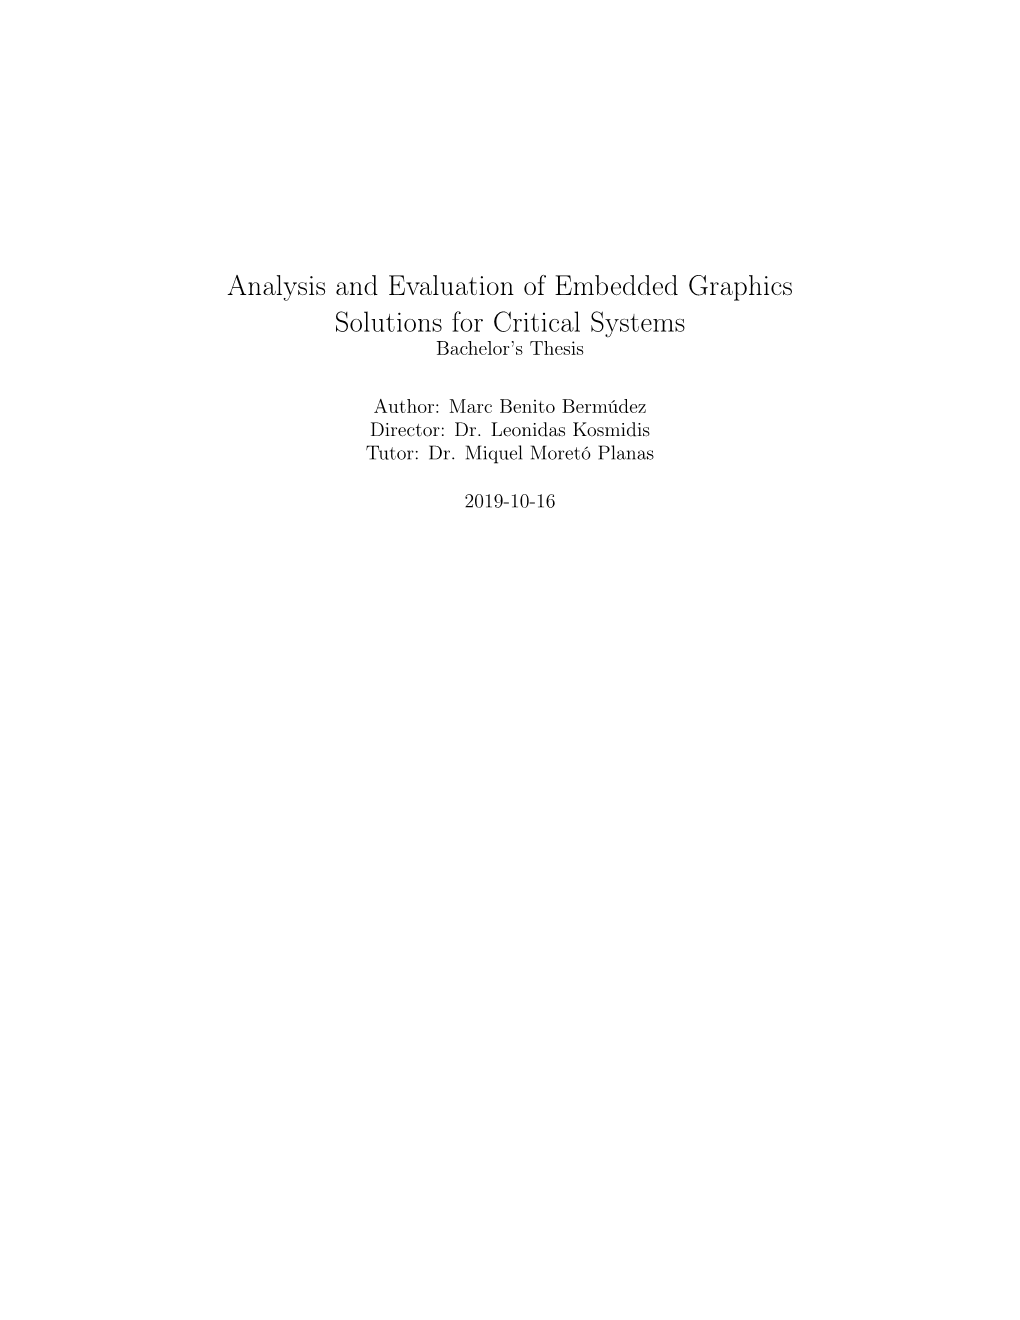 Analysis and Evaluation of Embedded Graphics Solutions for Critical Systems Bachelor’S Thesis